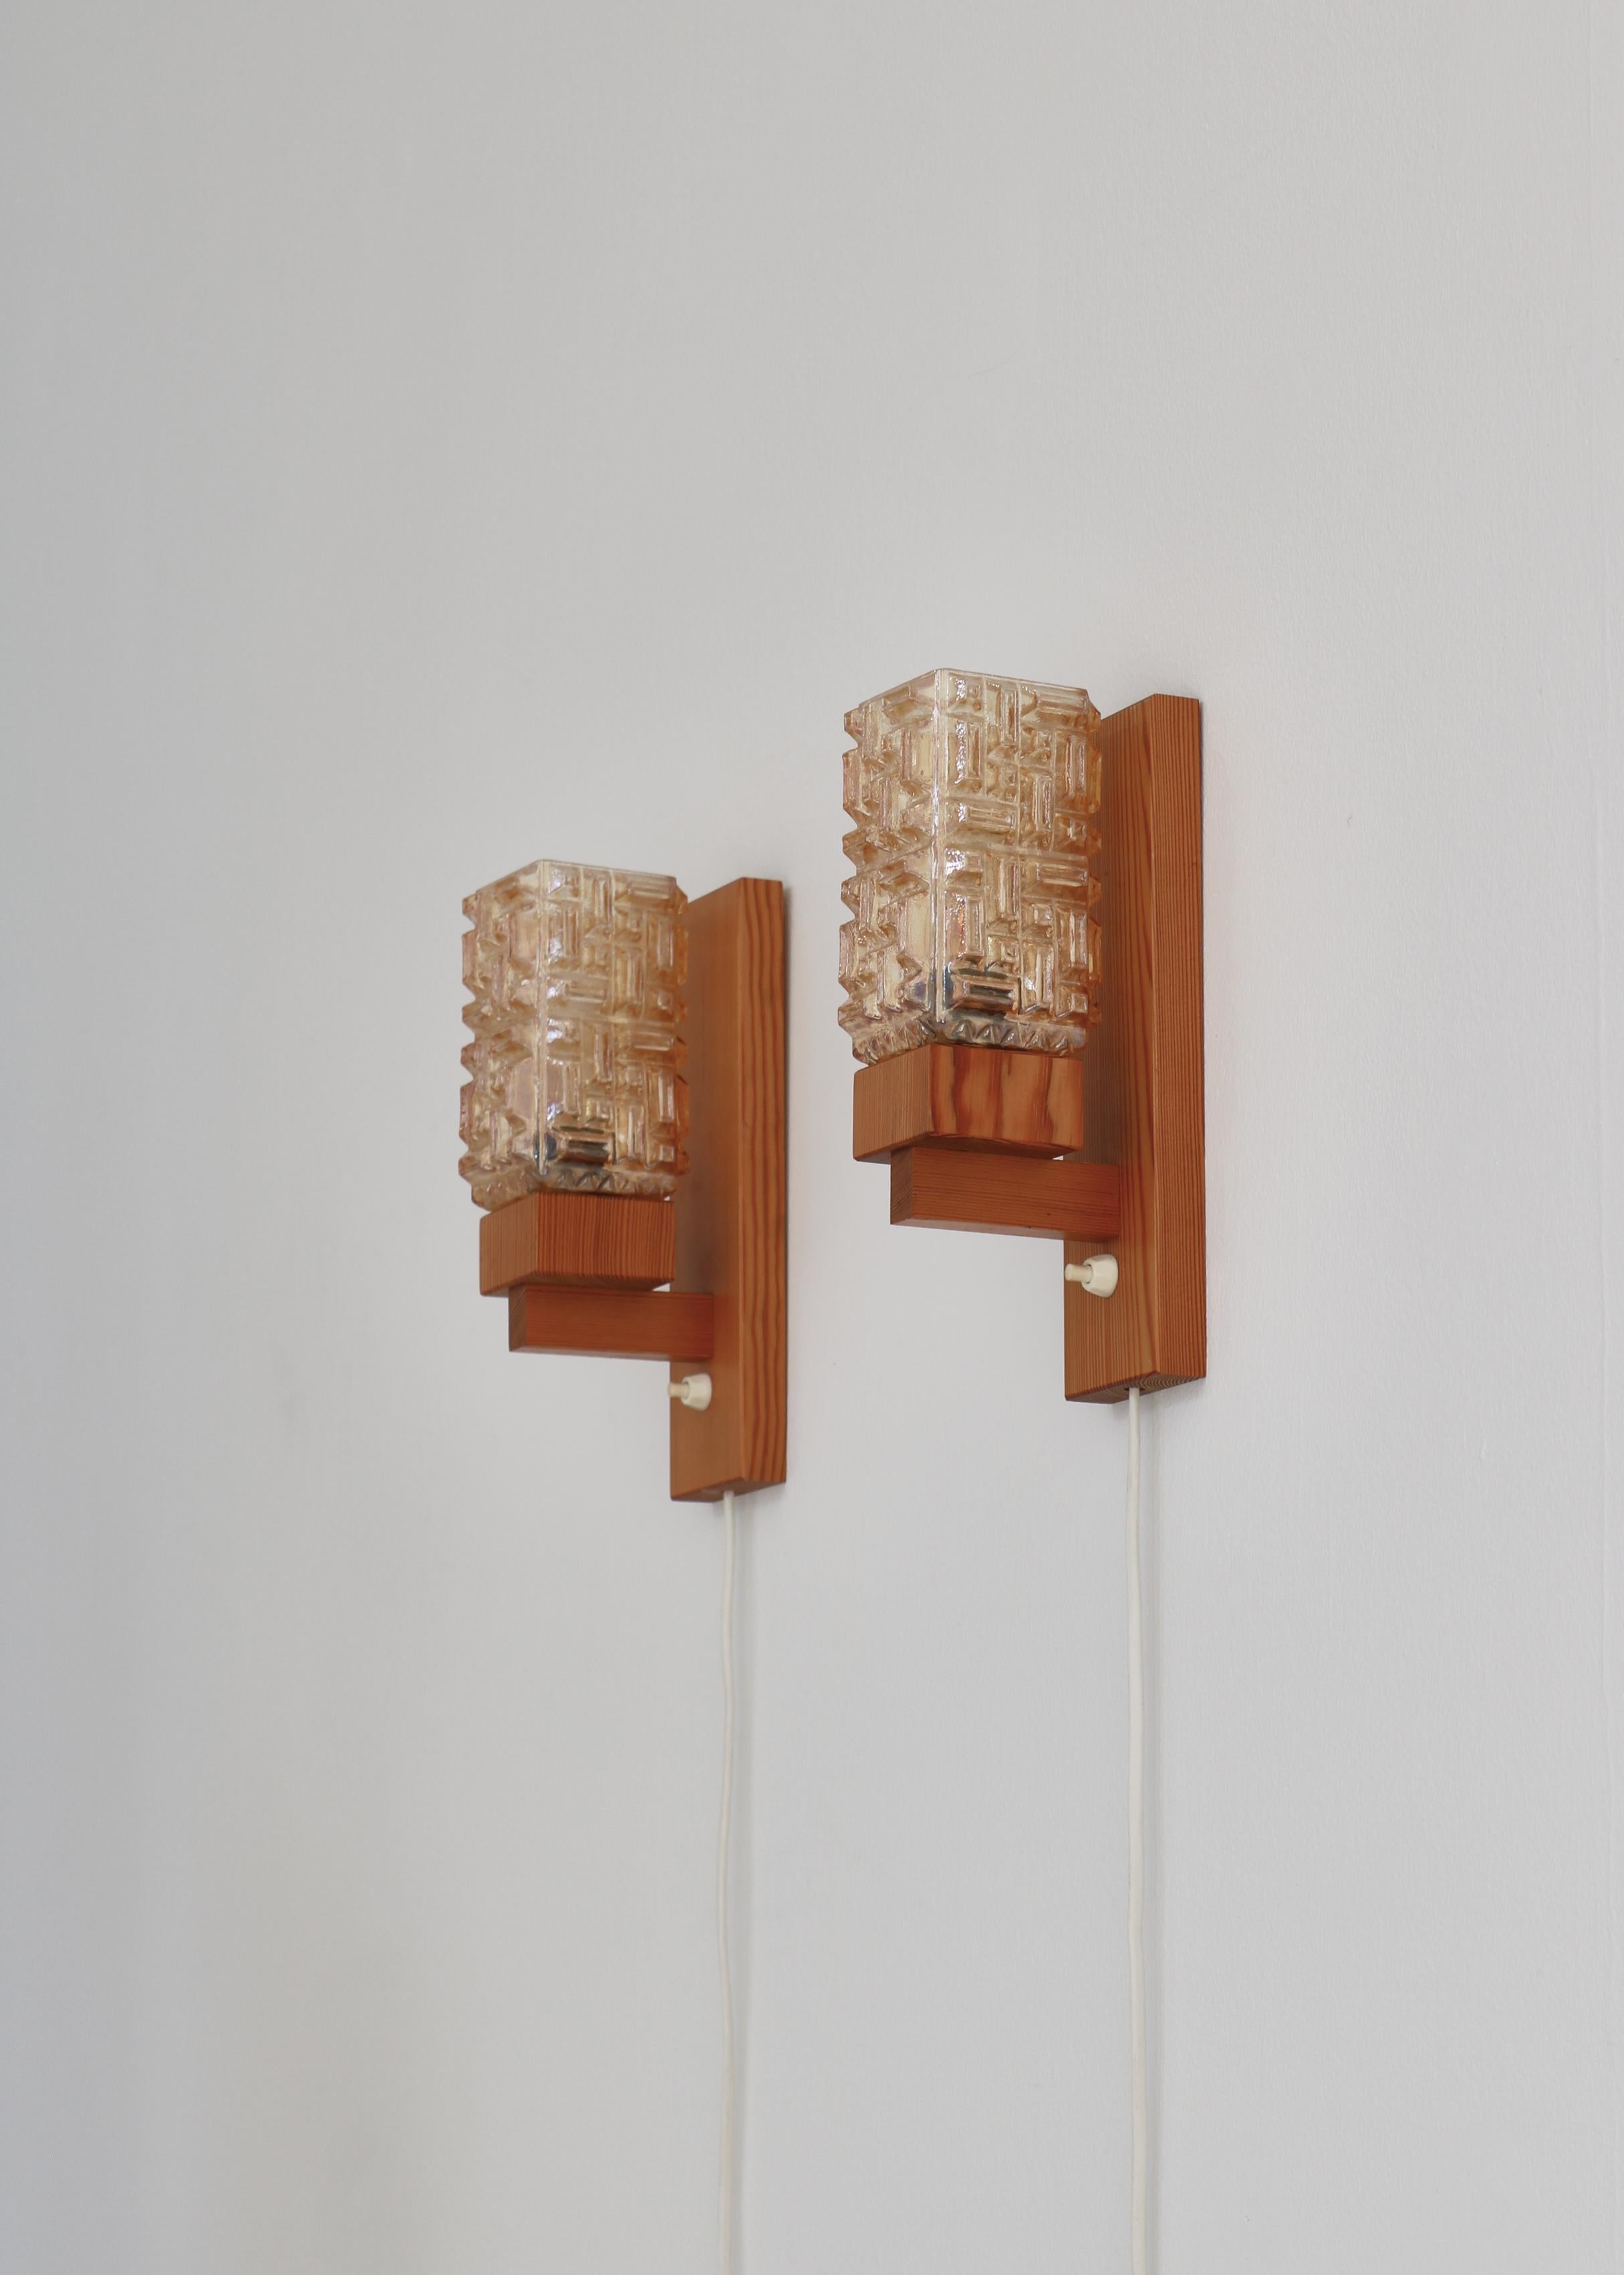 Wonderful set of Danish Modern wall lamps in solid Scandinavian pinewood and amber colored glass shades. The lamps were made in the 1970s by the small Danish workshop 